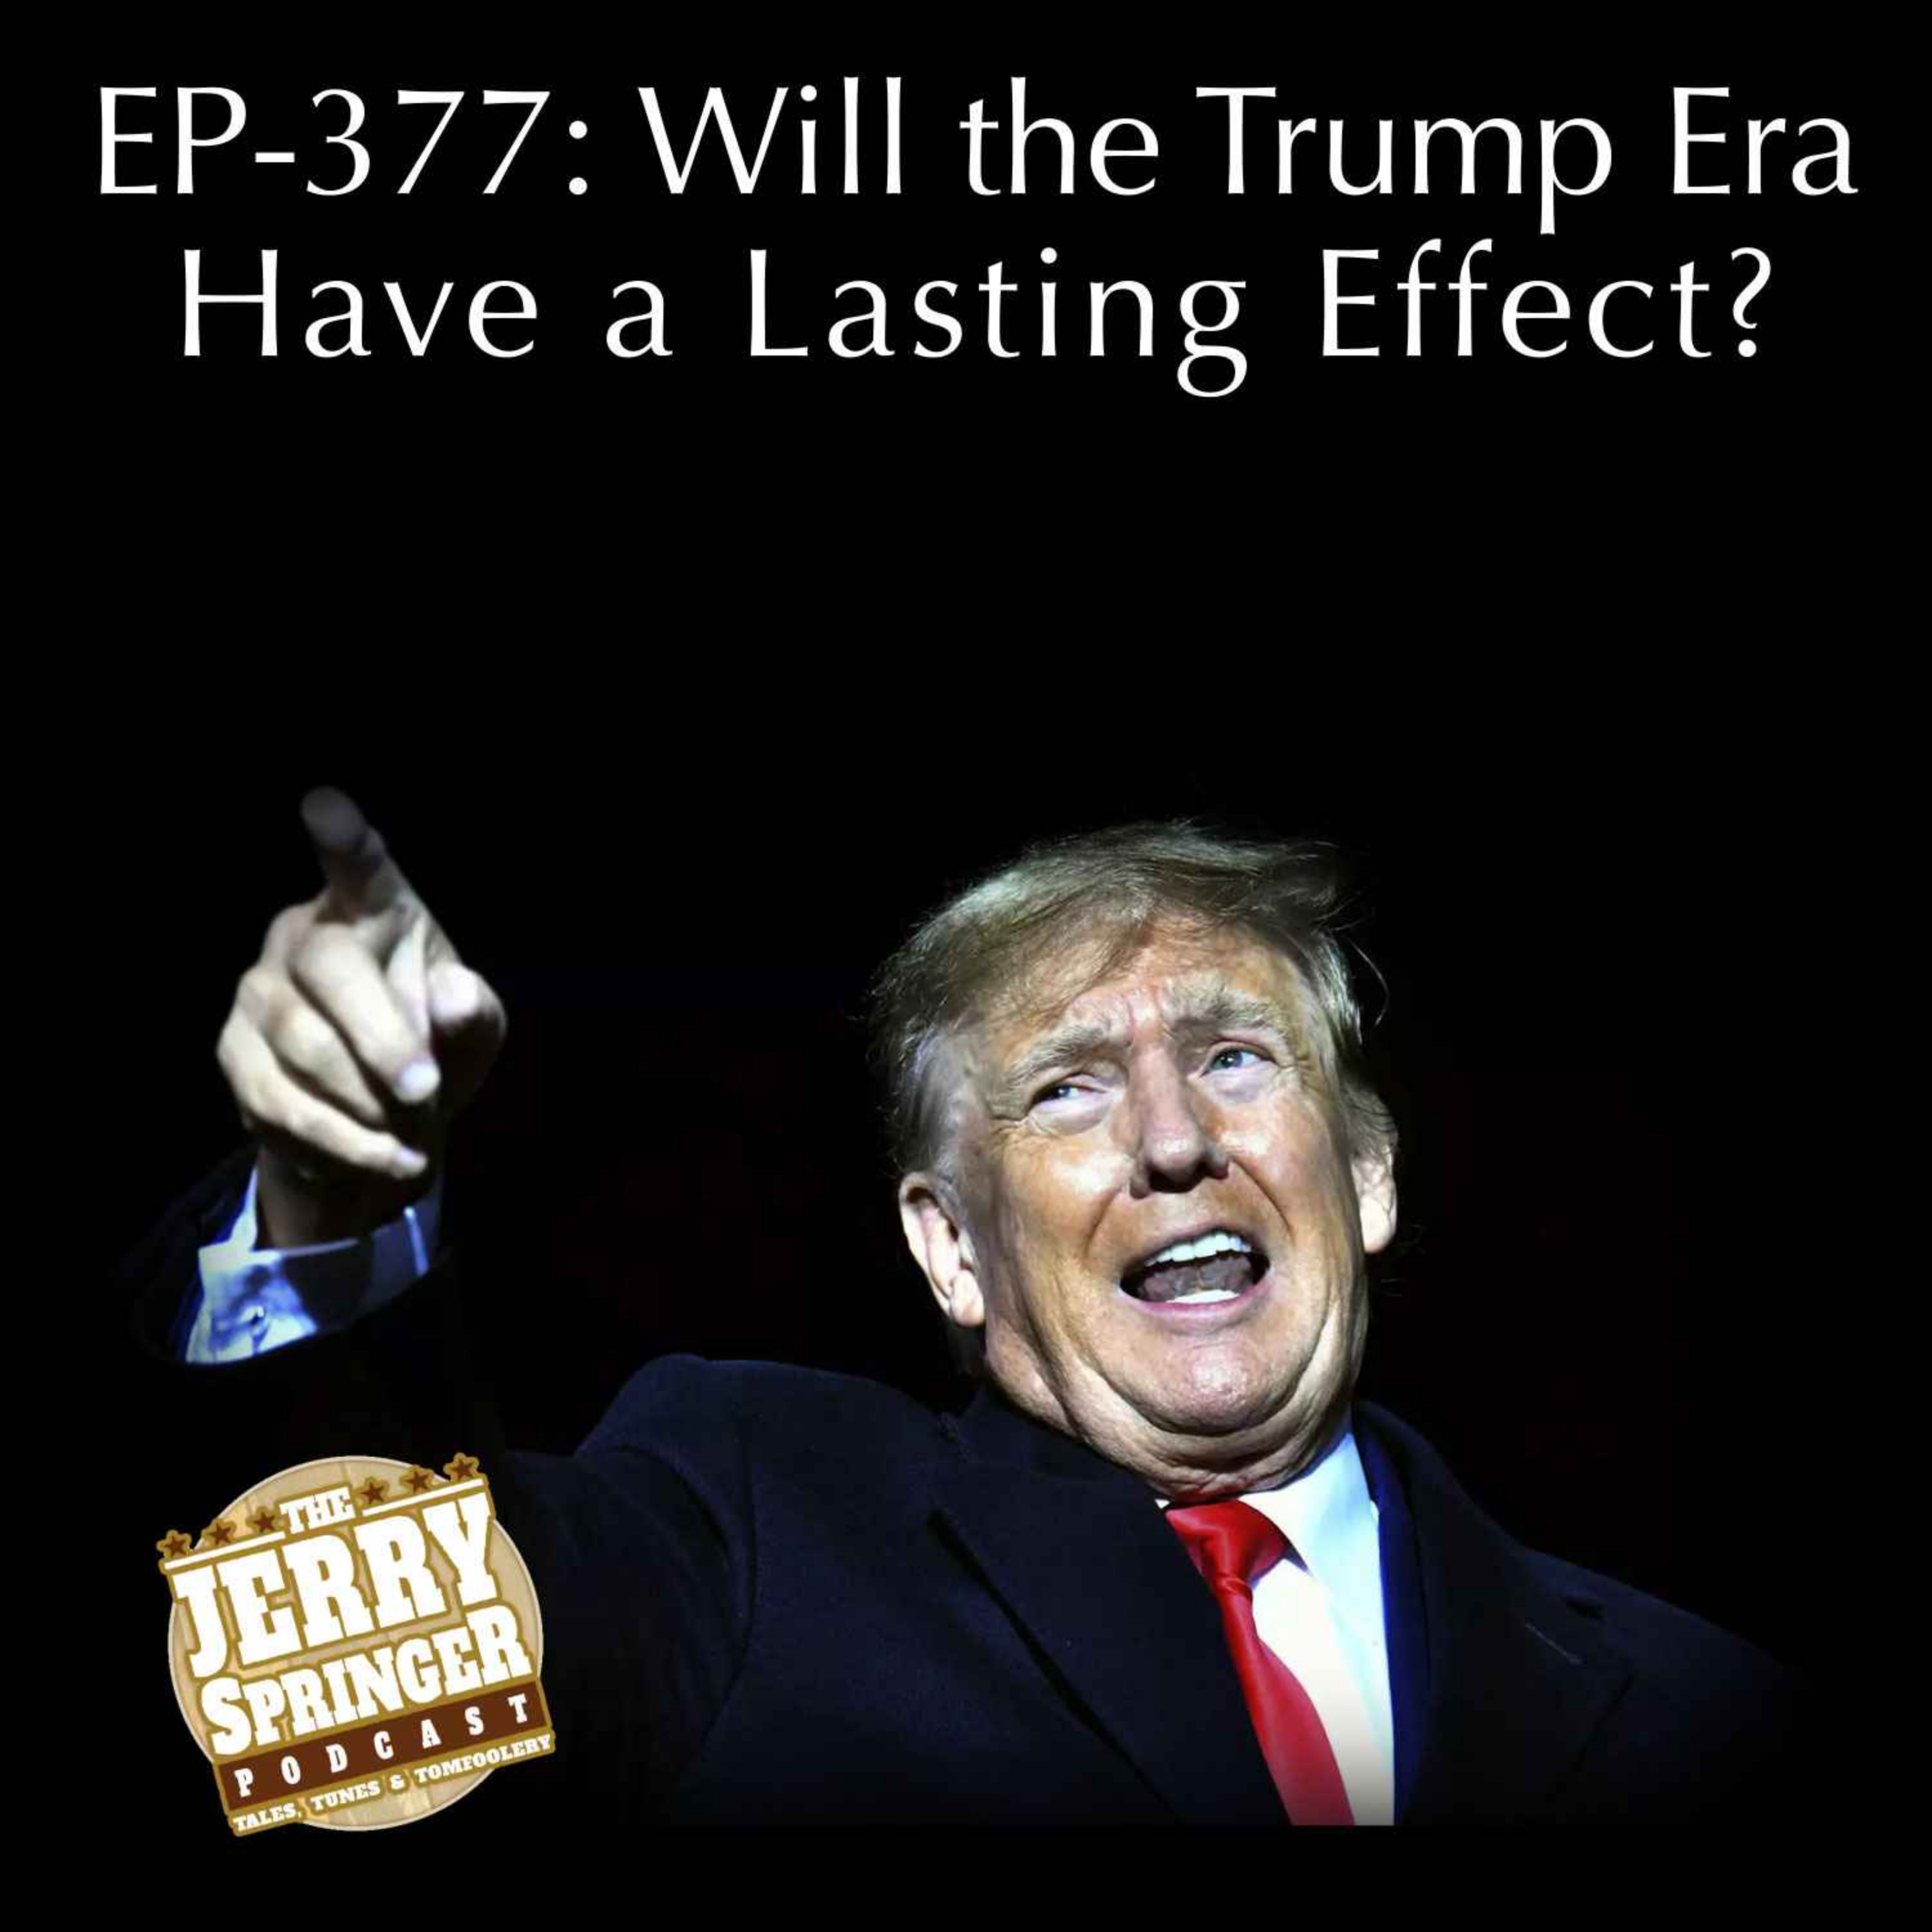 Will the Trump Era Have a Lasting Effect? EP - 377